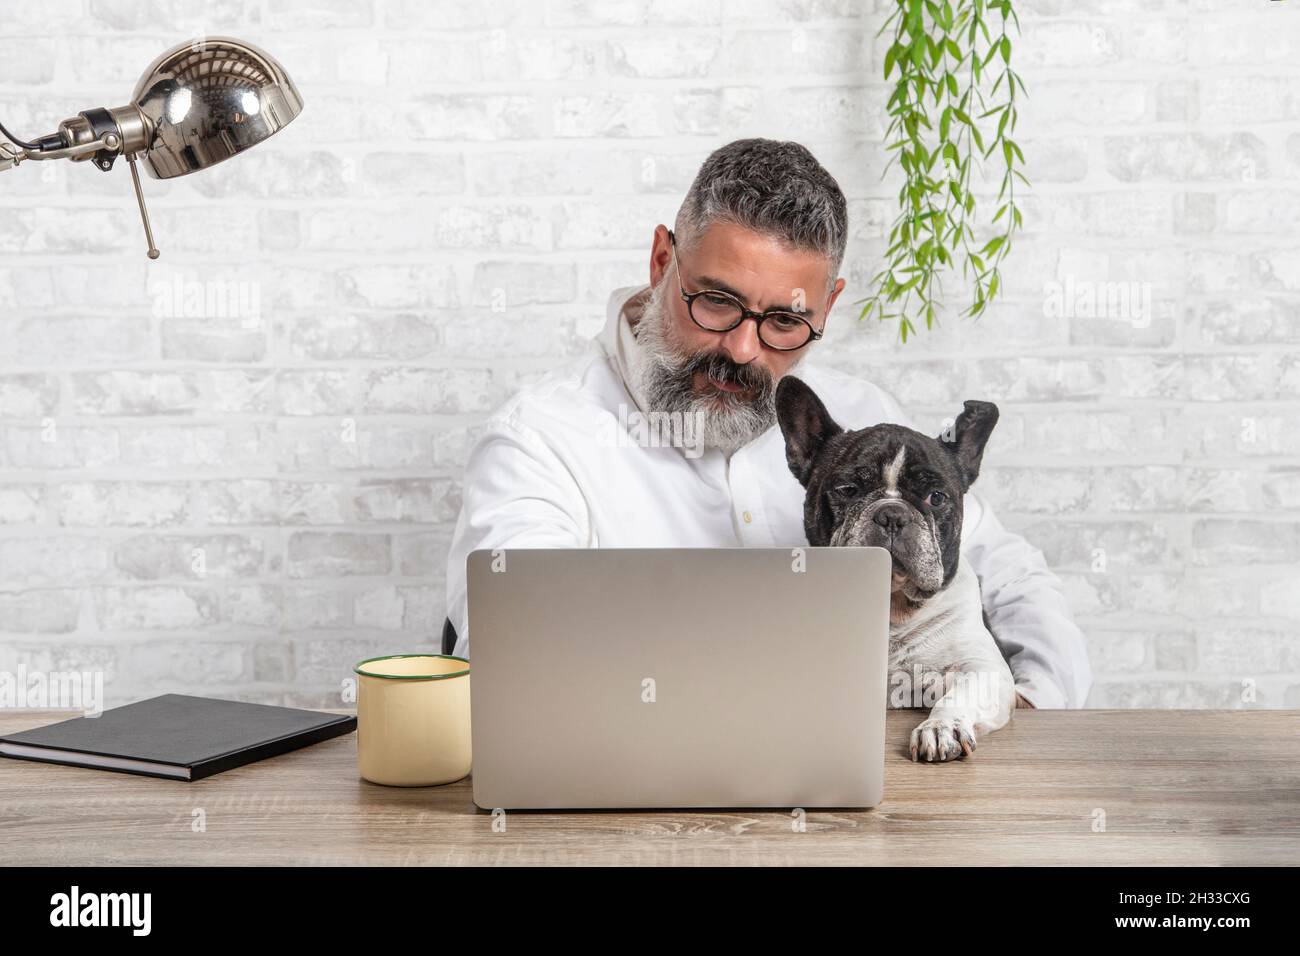 Freelance man working from home with his dog sitting in the office. Man using a laptop at home with a cute dog Stock Photo